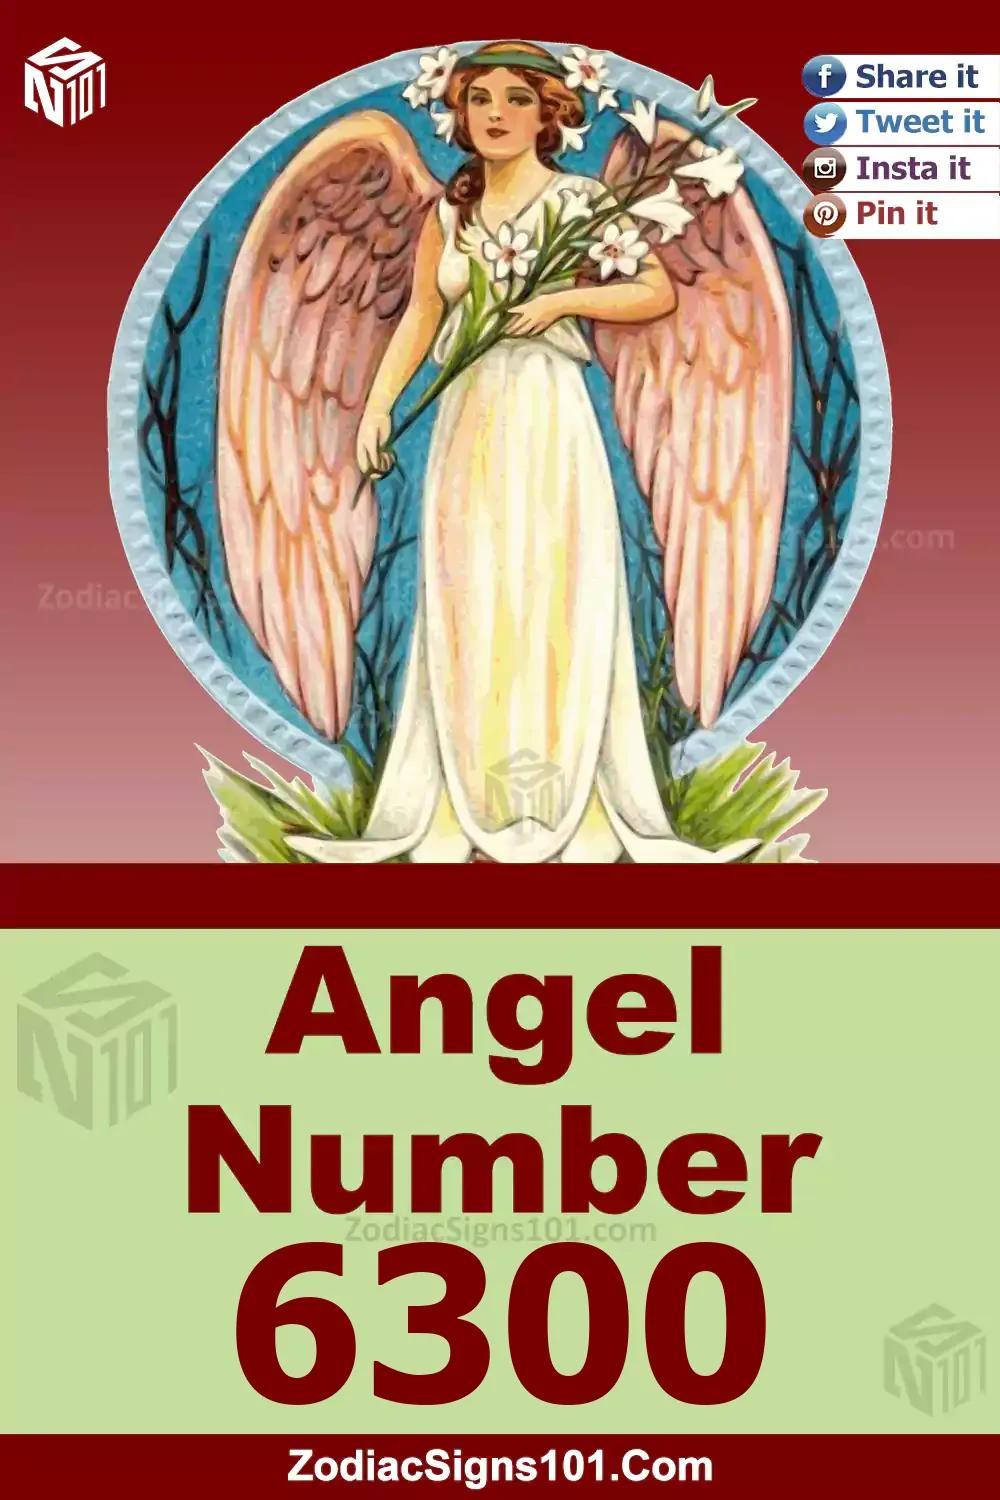 6300 Angel Number Meaning